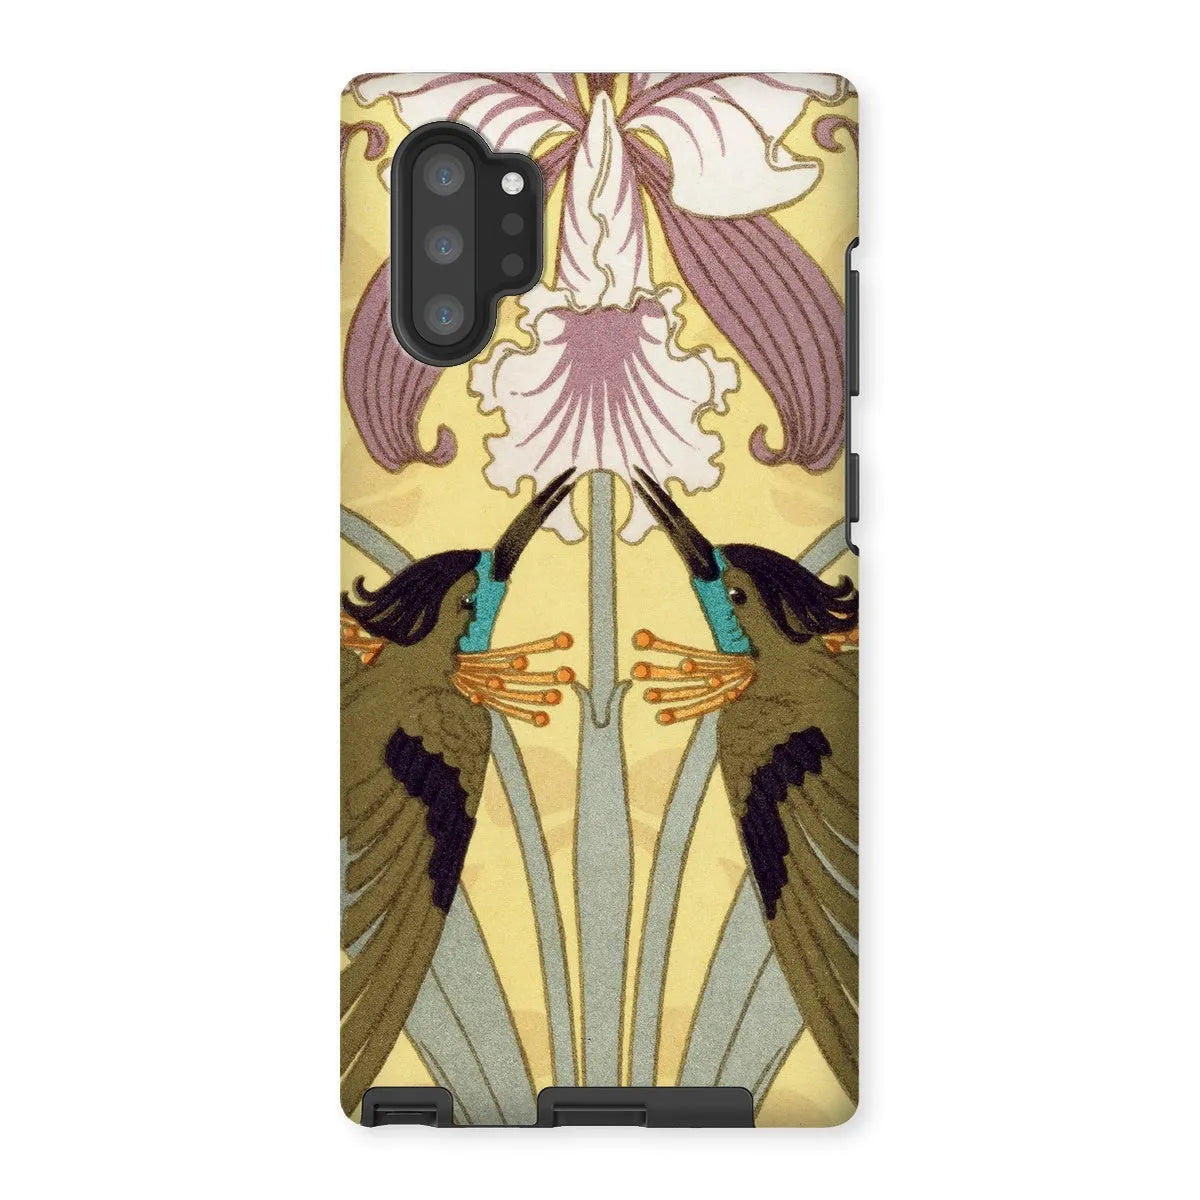 Hummingbirds And Orchids Phone Case - Maurice Pillard Verneuil - Samsung Galaxy Note 10p / Matte - Mobile Phone Cases